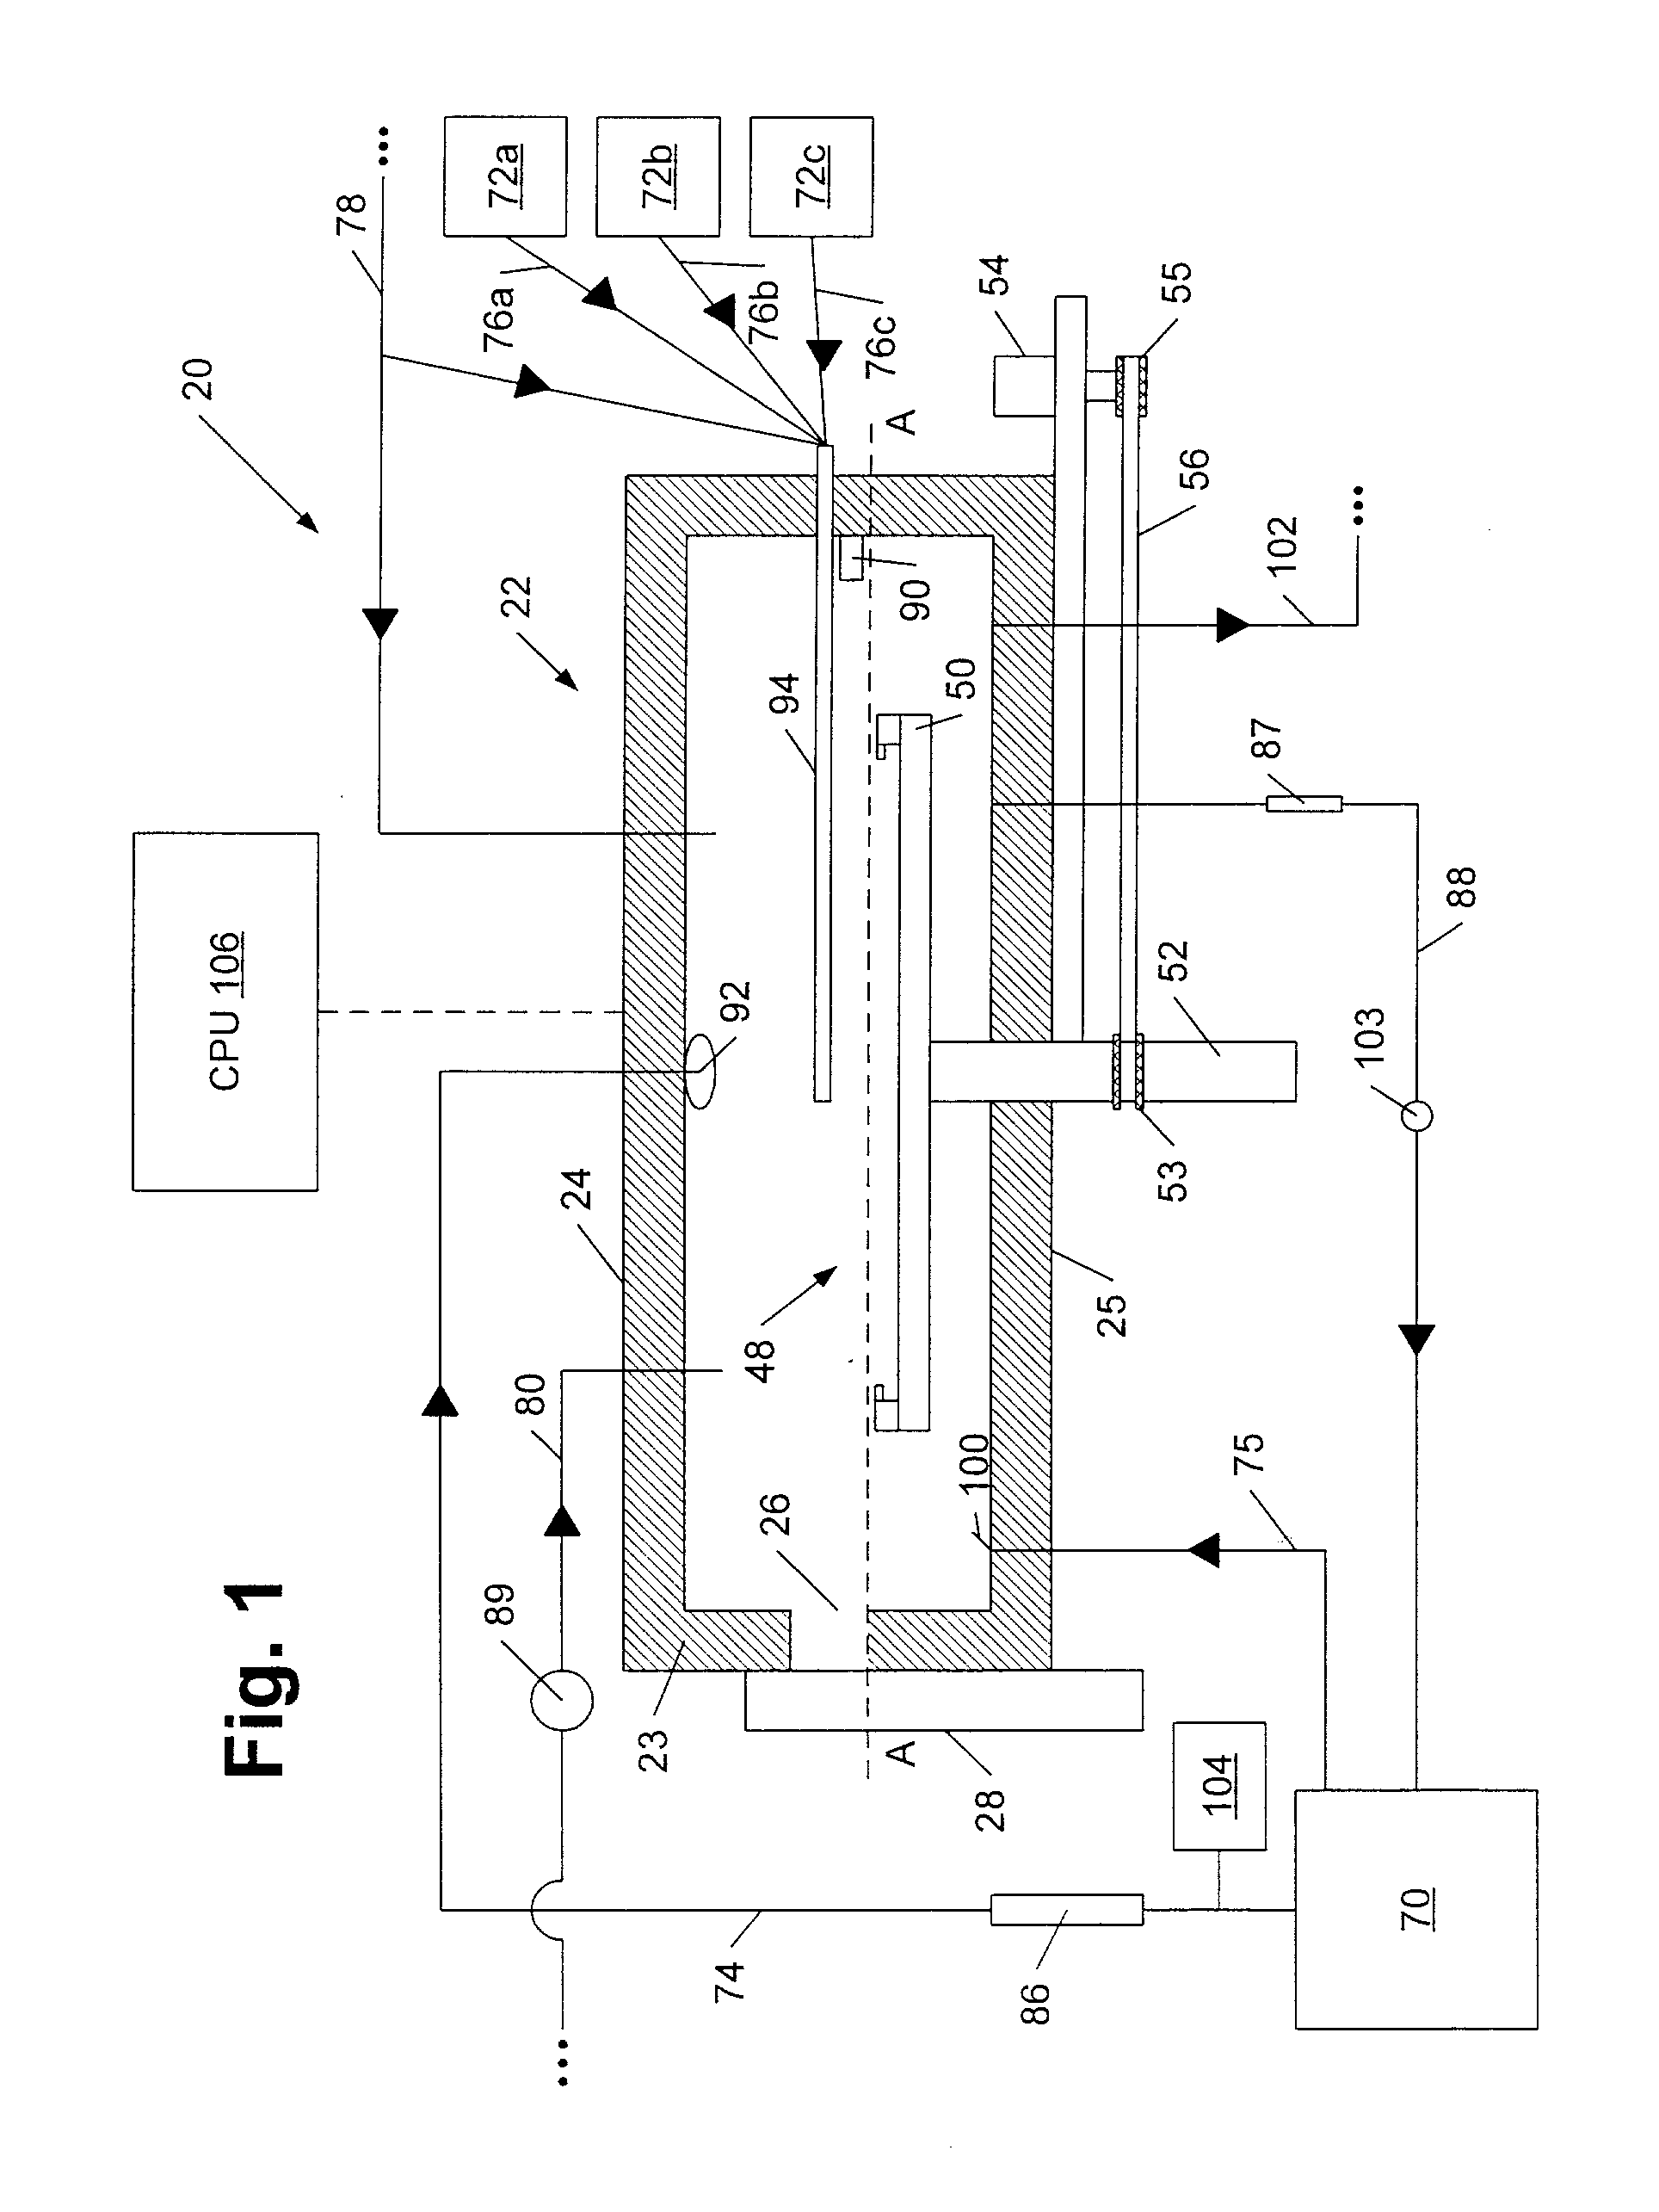 Method for Strengthening Adhesion Between Dielectric Layers Formed Adjacent to Metal Layers